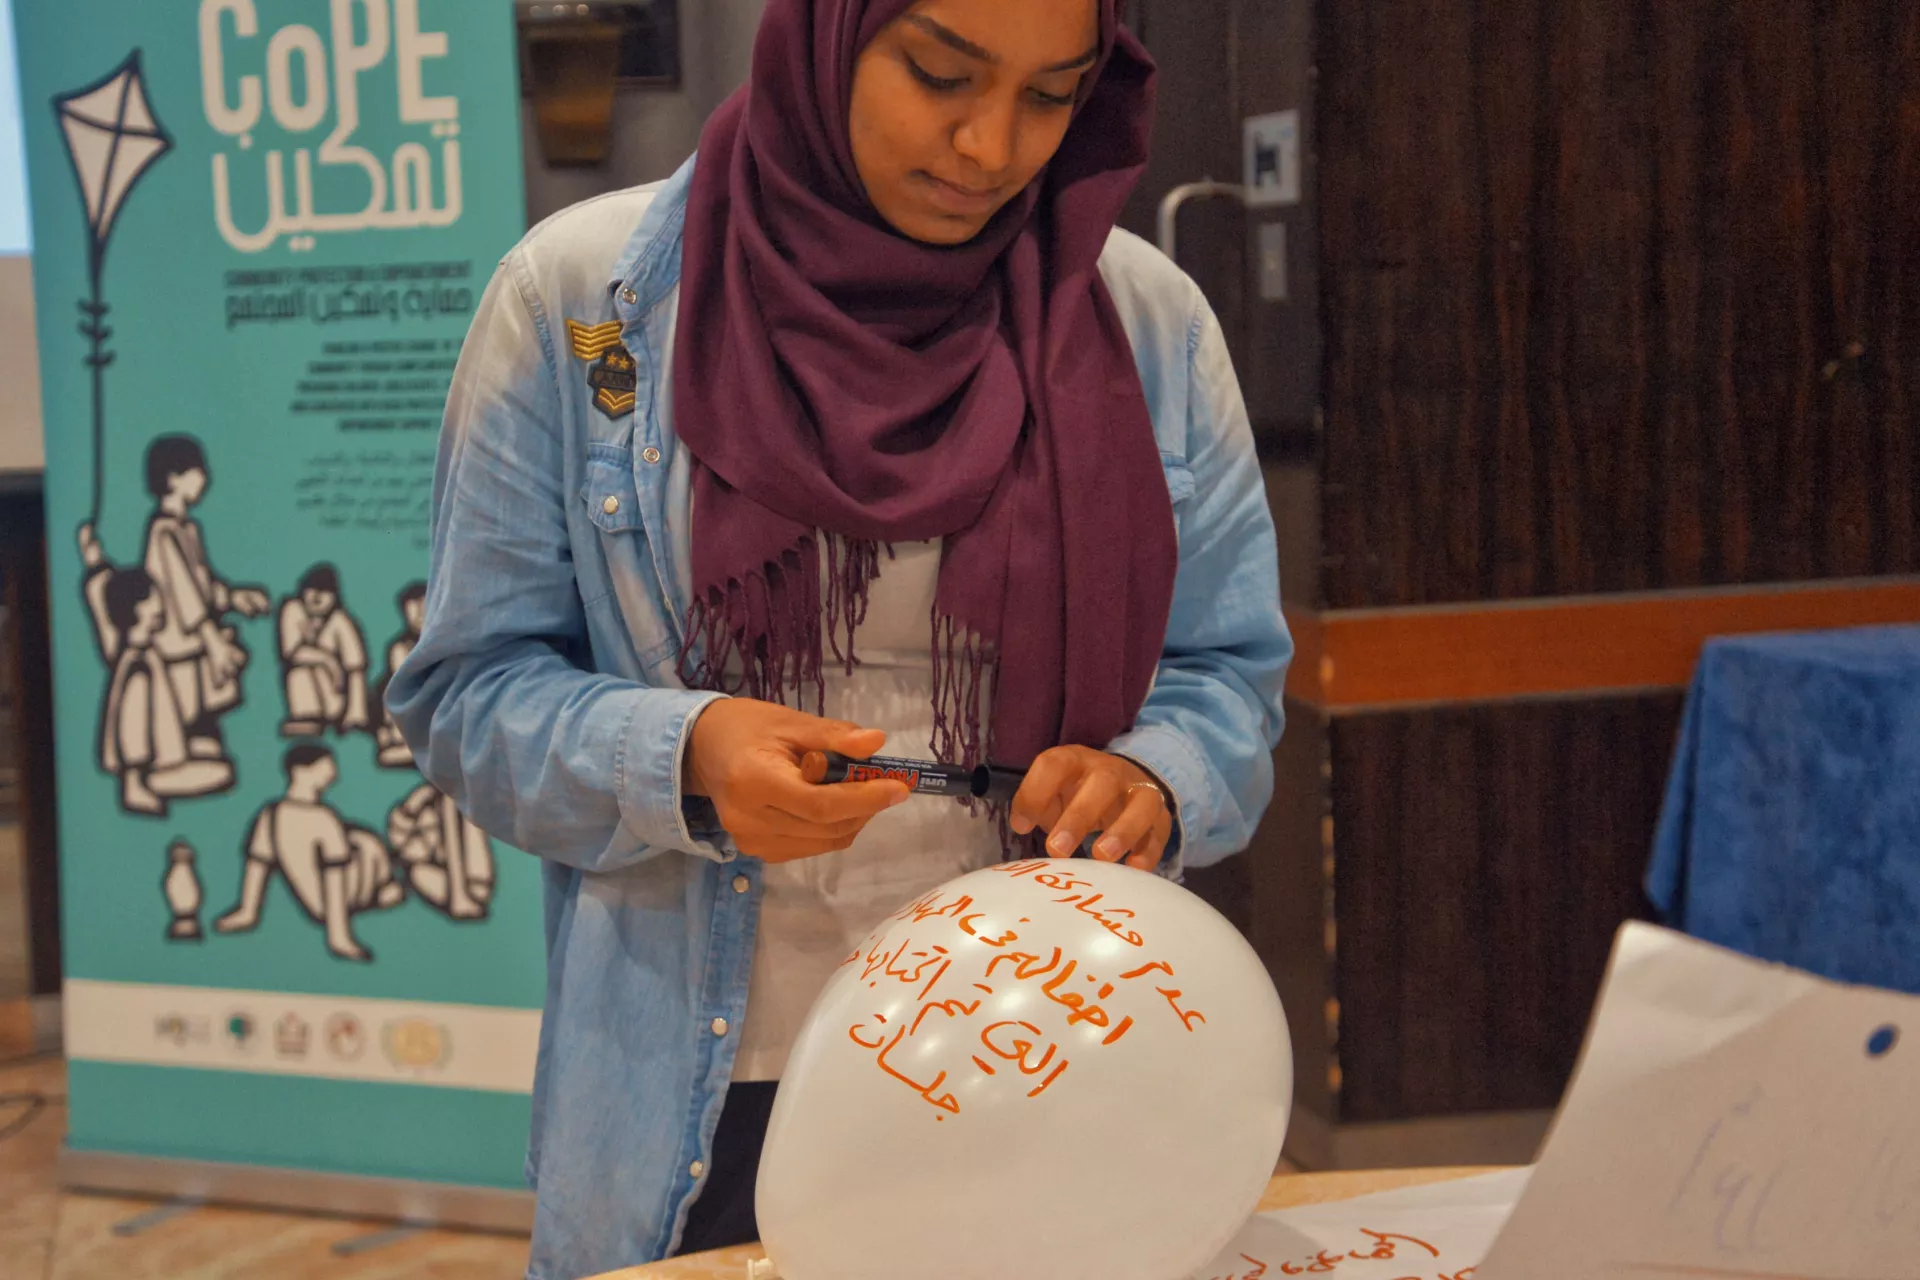 A Palestinian girl at CoPE event writing on a balloon